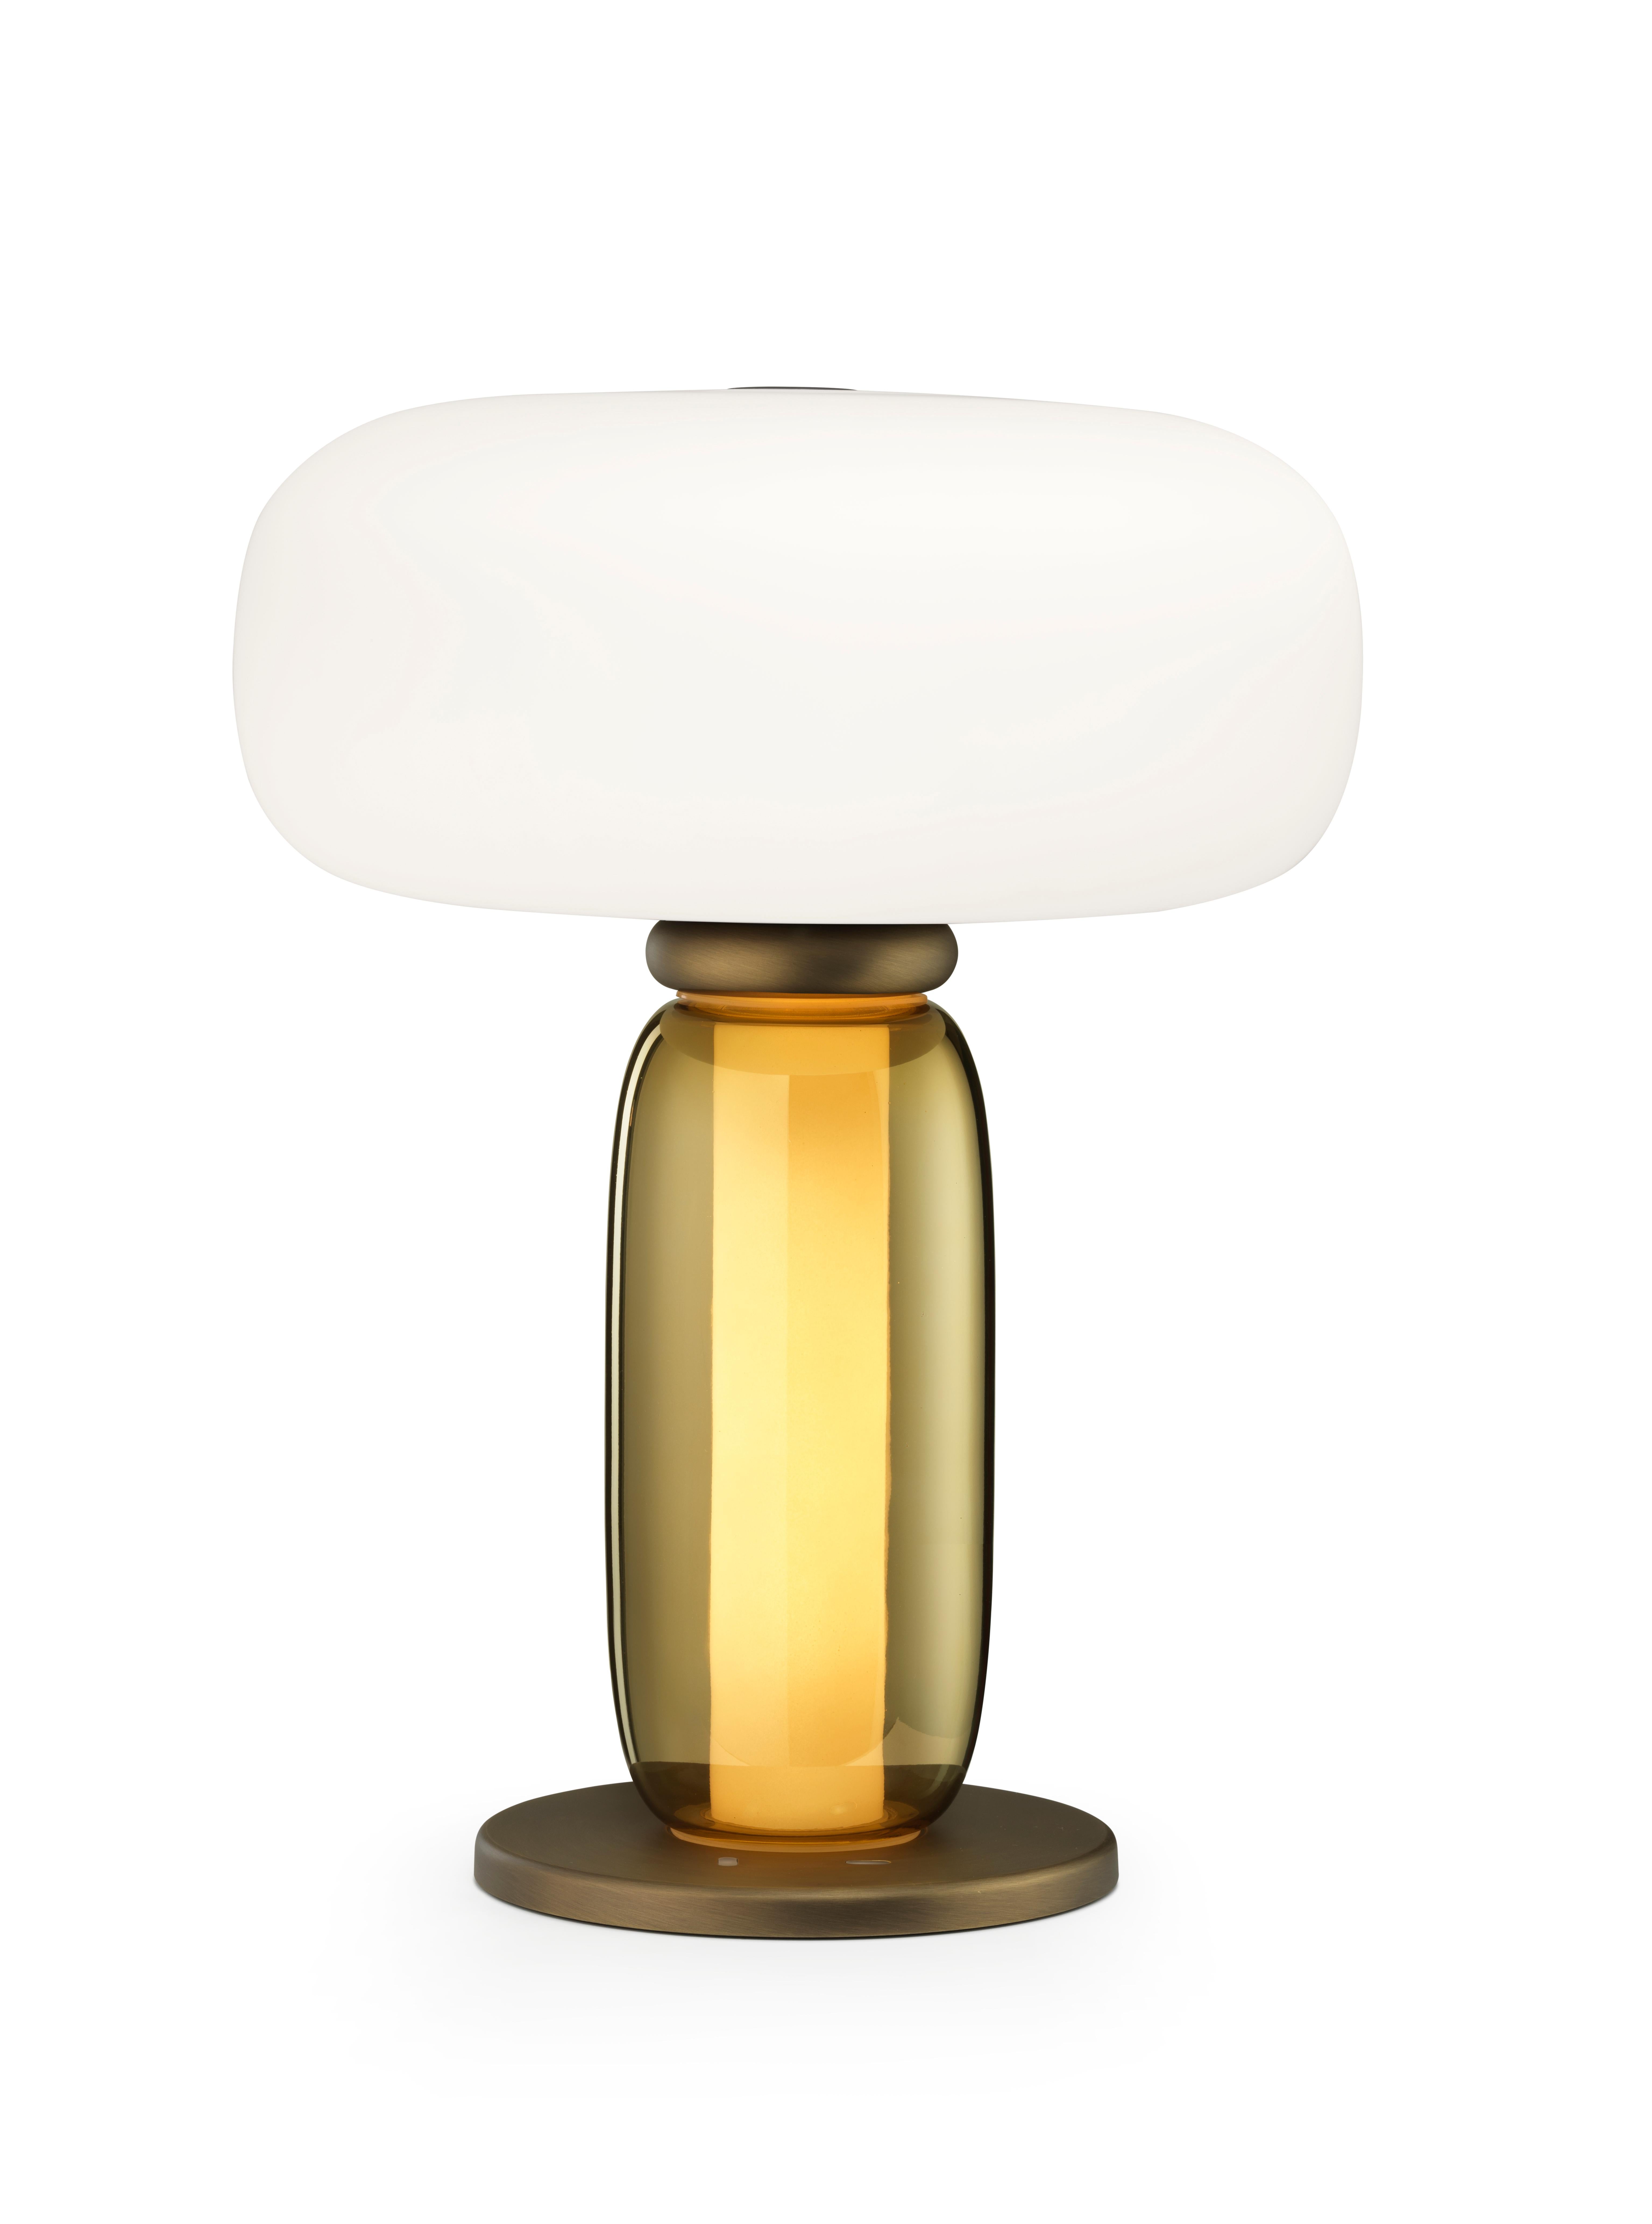 Modern Ghidini 1961 One on One Table Lamp in Burnished Brass and Glass by Branch For Sale